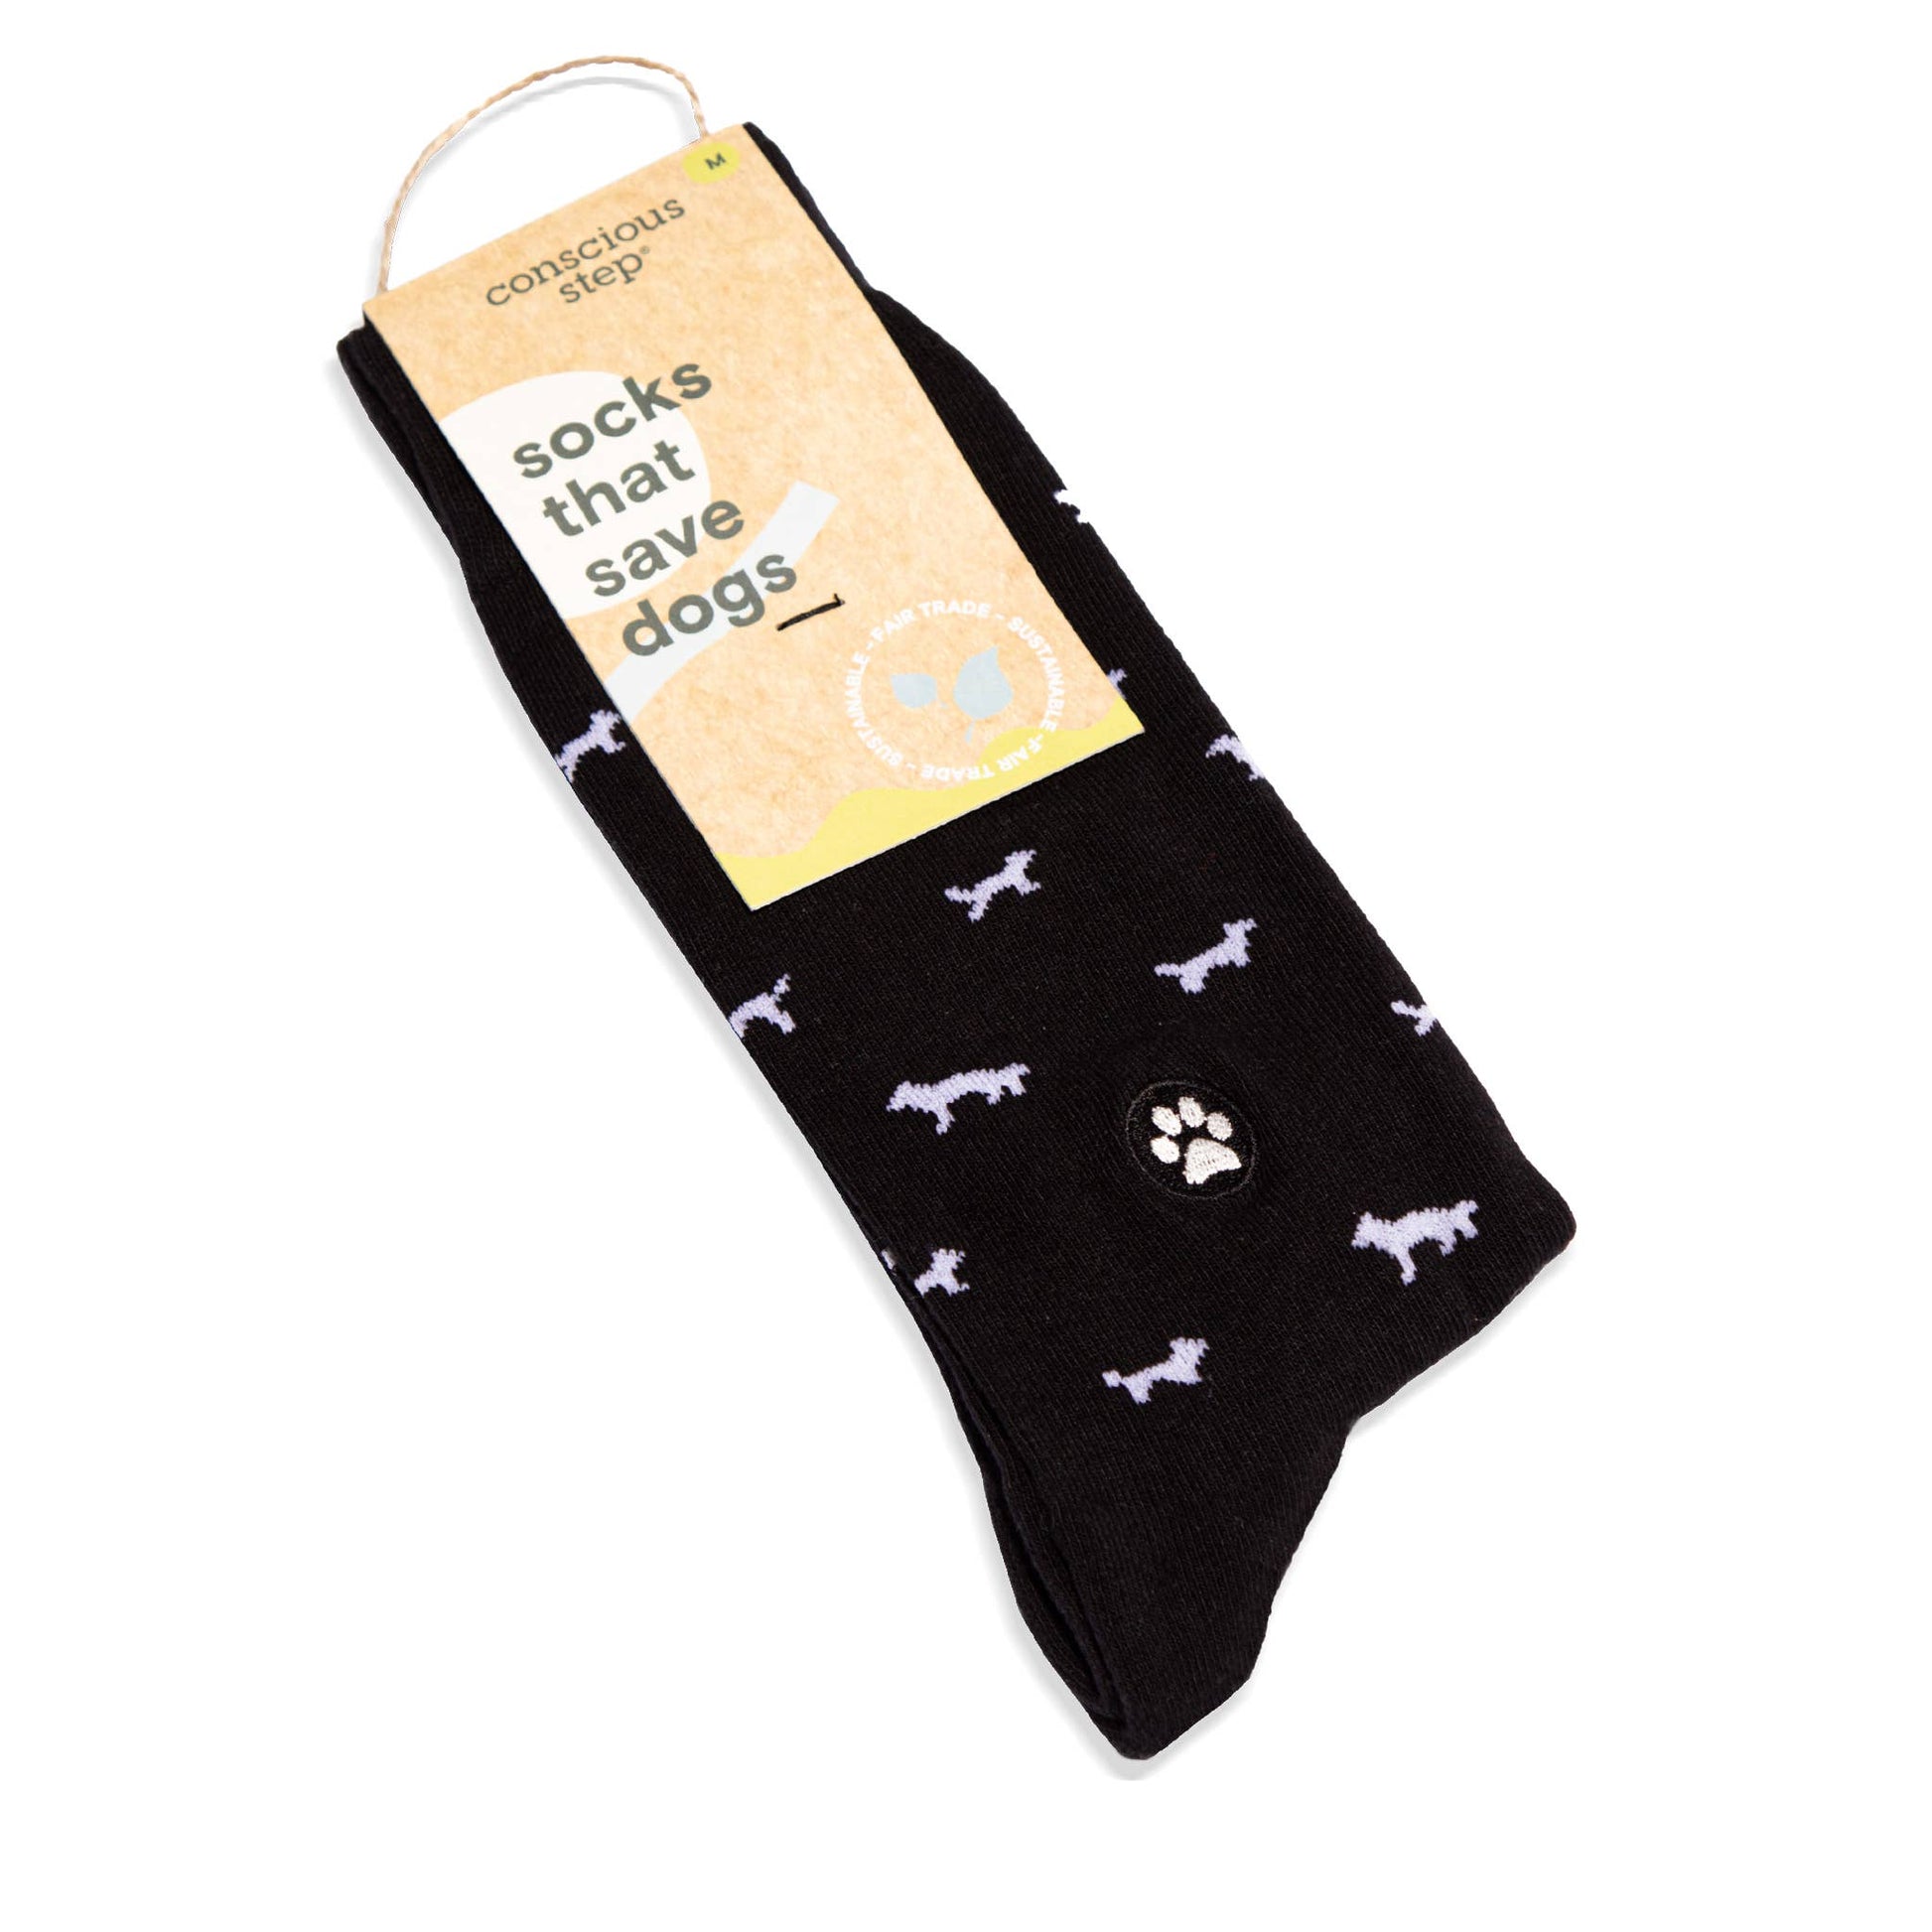 Conscious Step - Socks that Save Dogs (Black Dogs)  Conscious Step   -better made easy-eco-friendly-sustainable-gifting